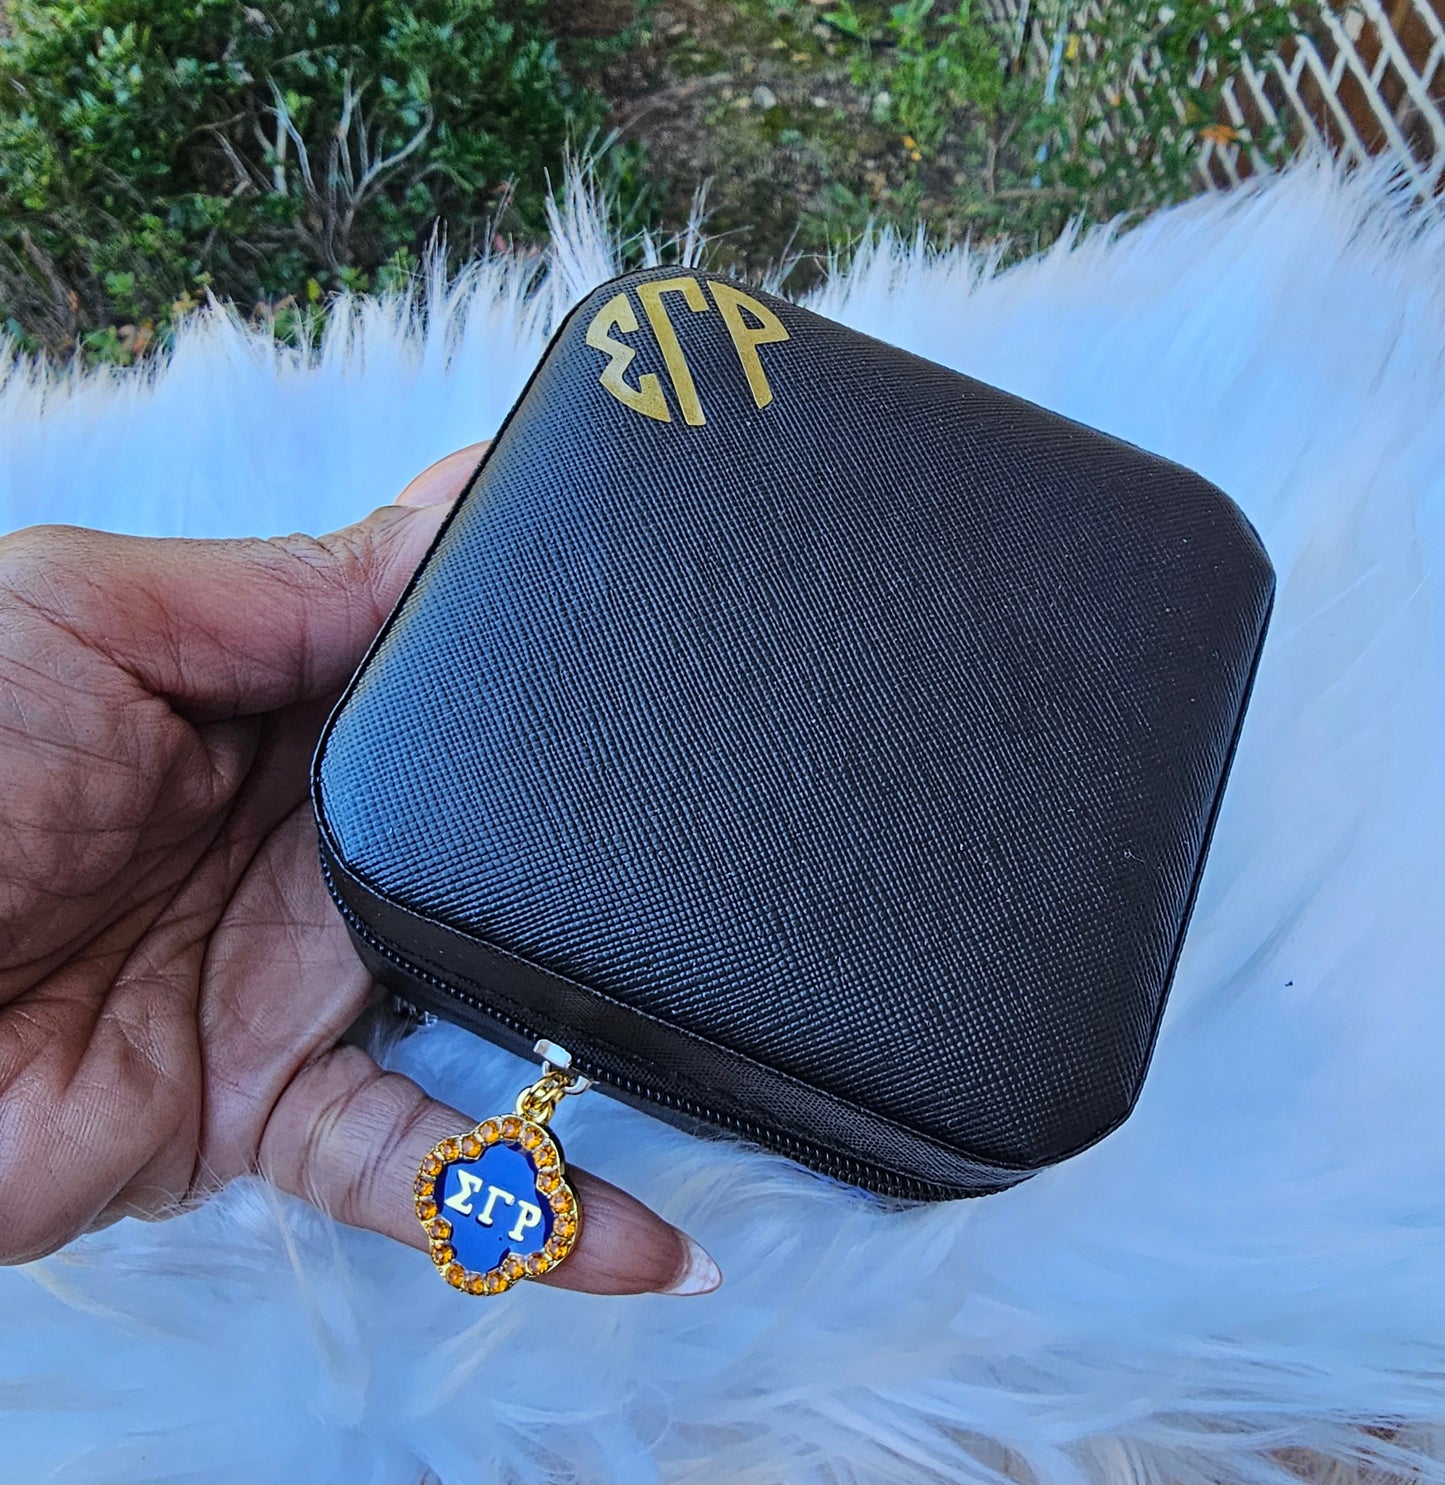 Small Sigma Gamma Rho Jewelry Boxes Available in Beat For Traveling